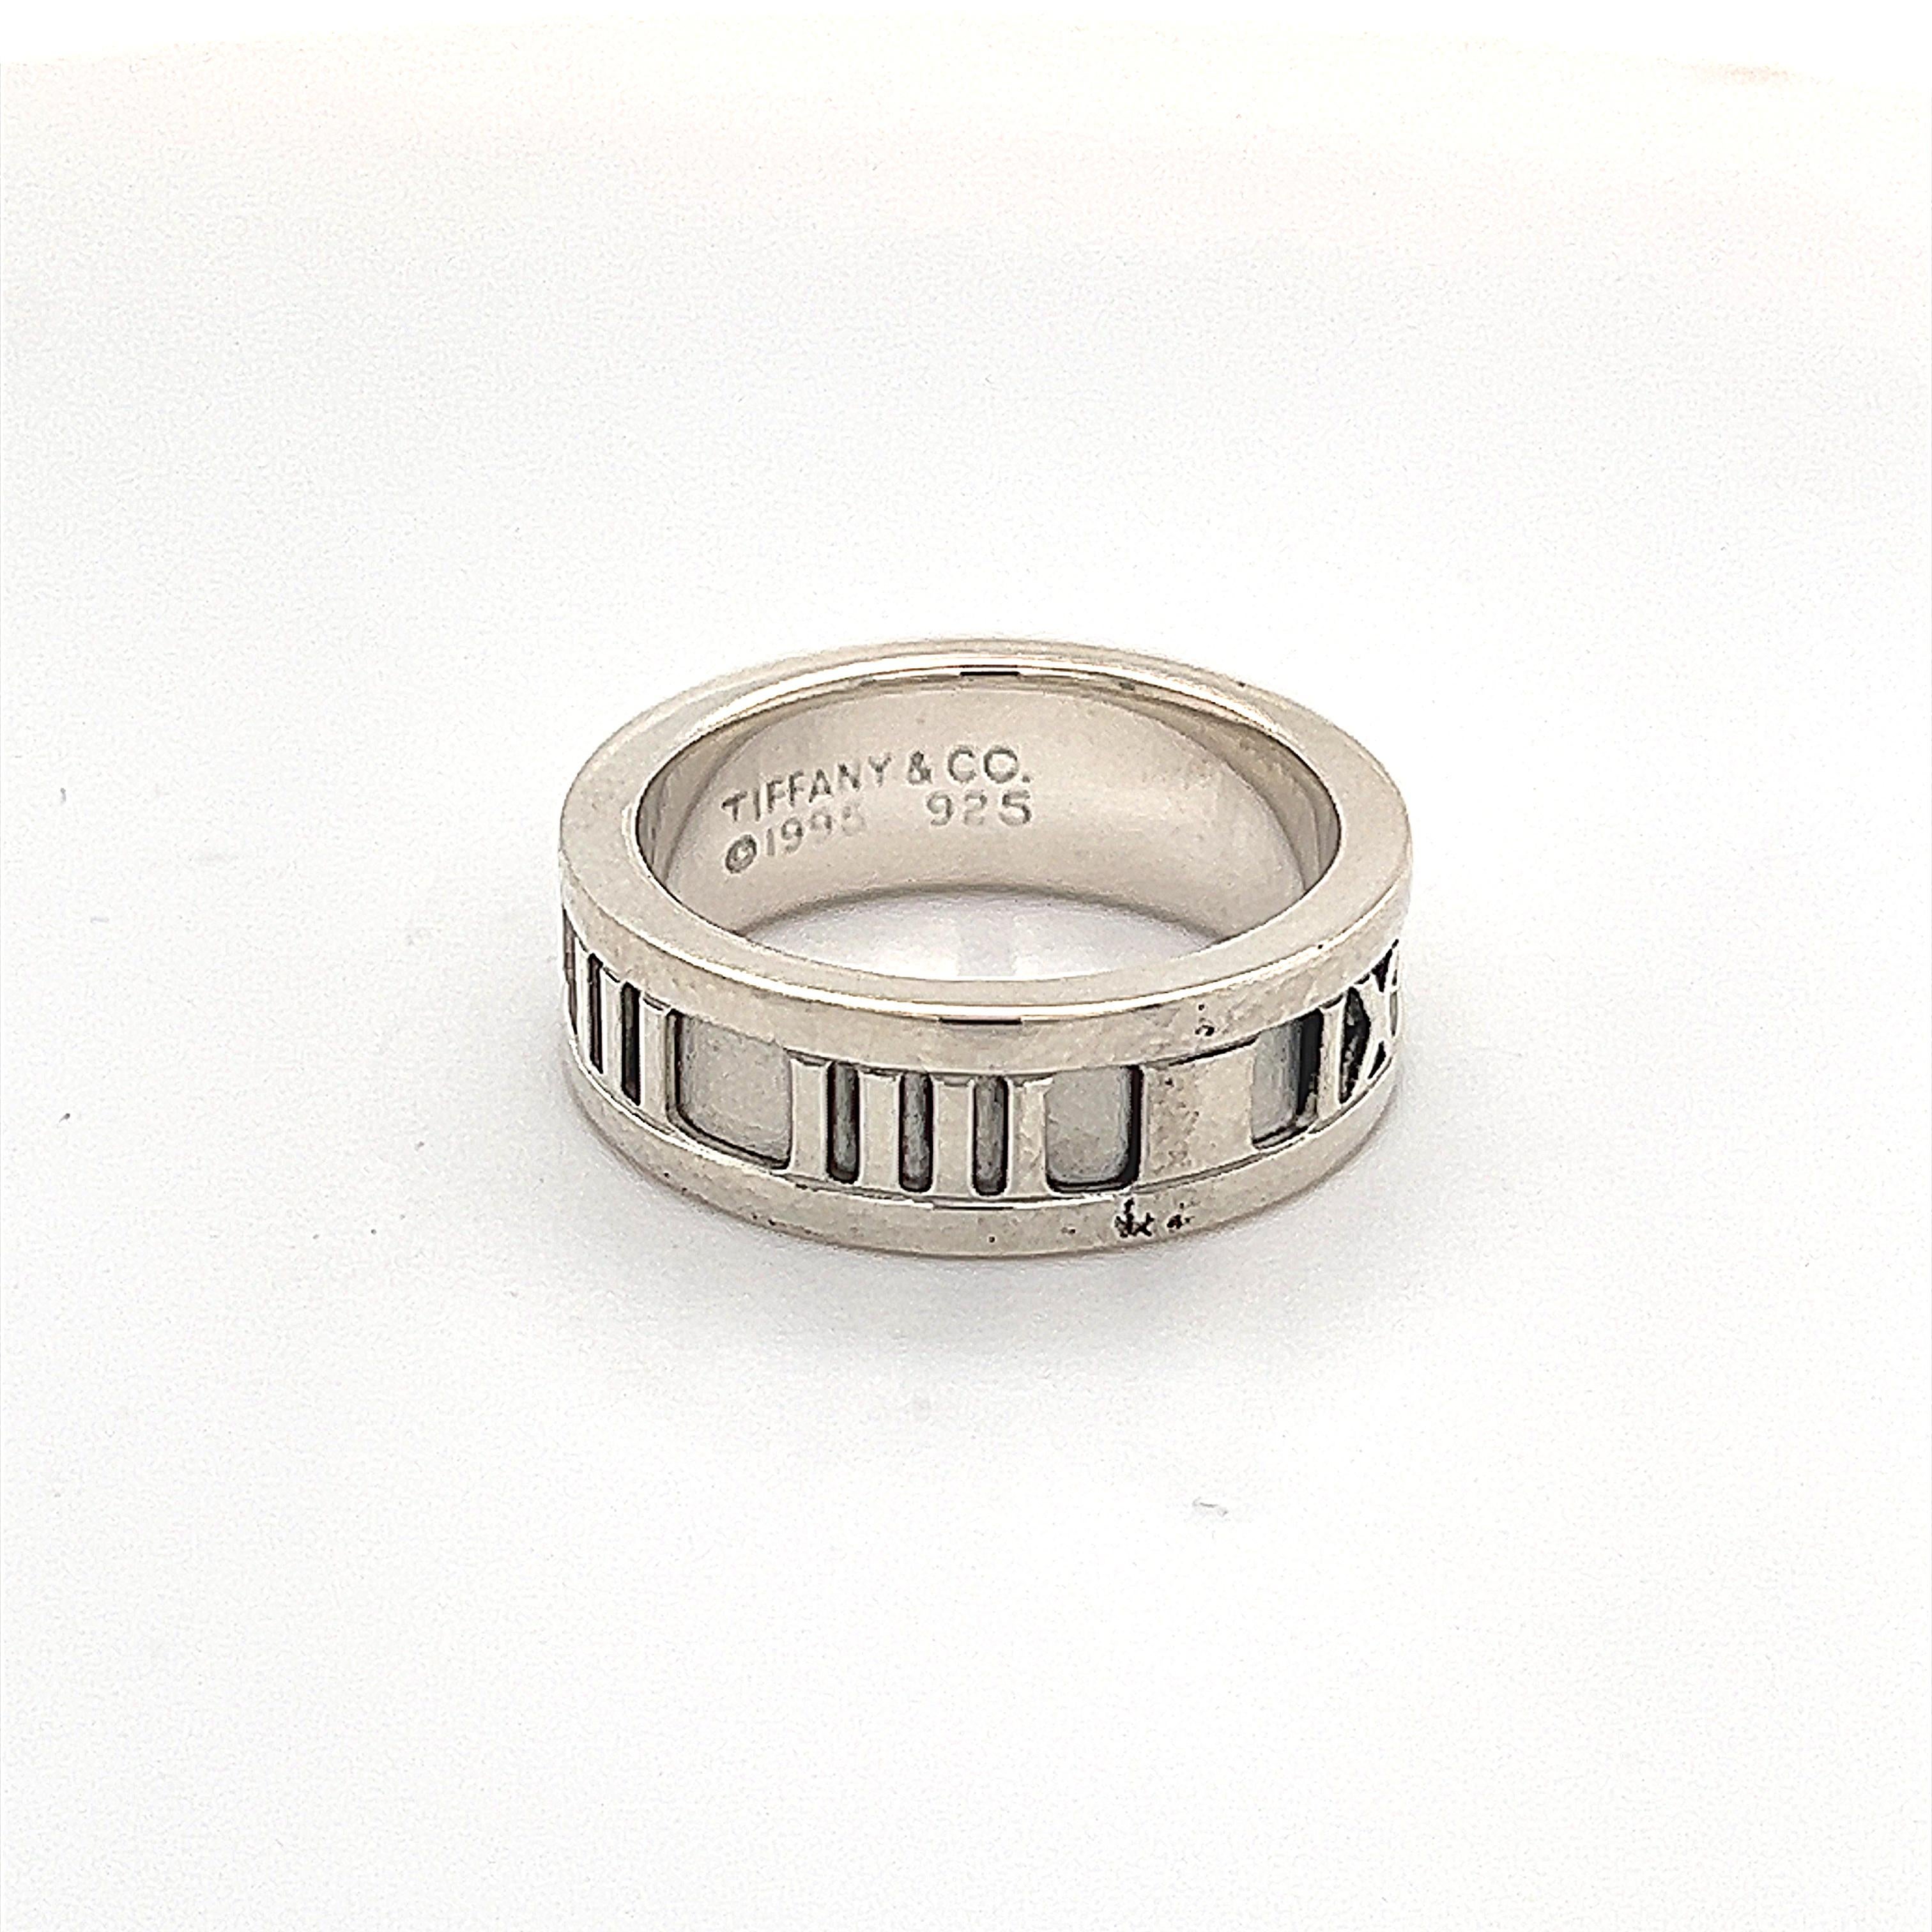 Tiffany & Co. Estate Atlas Ring 4 Silver 6 mm Height 3